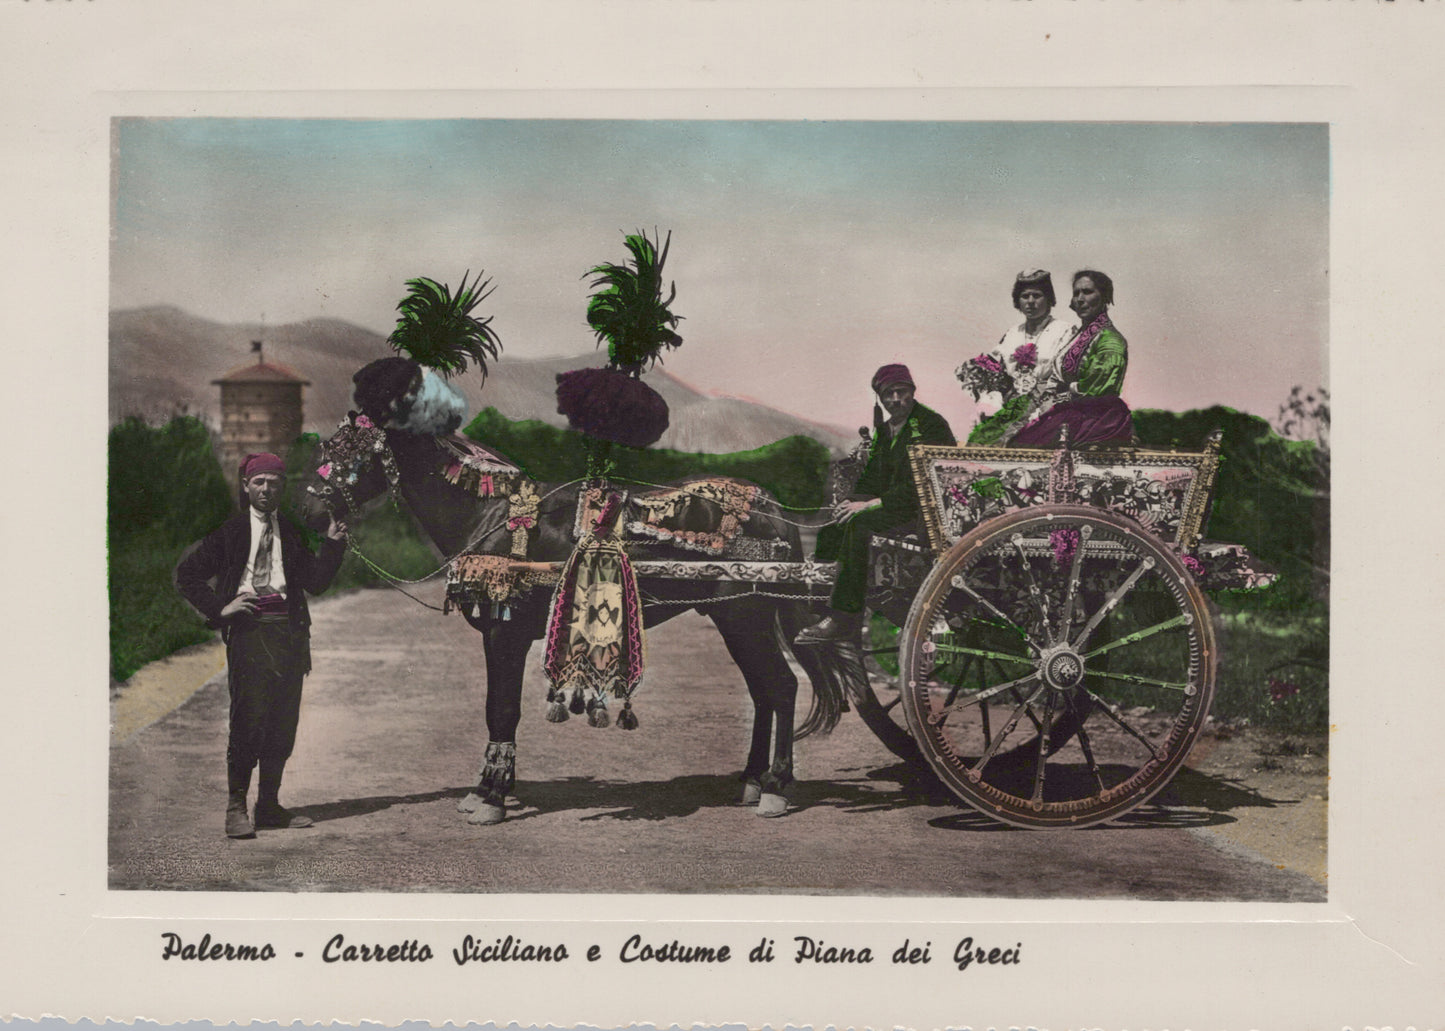 Sicilian Cart and Greek Costumes, Palermo